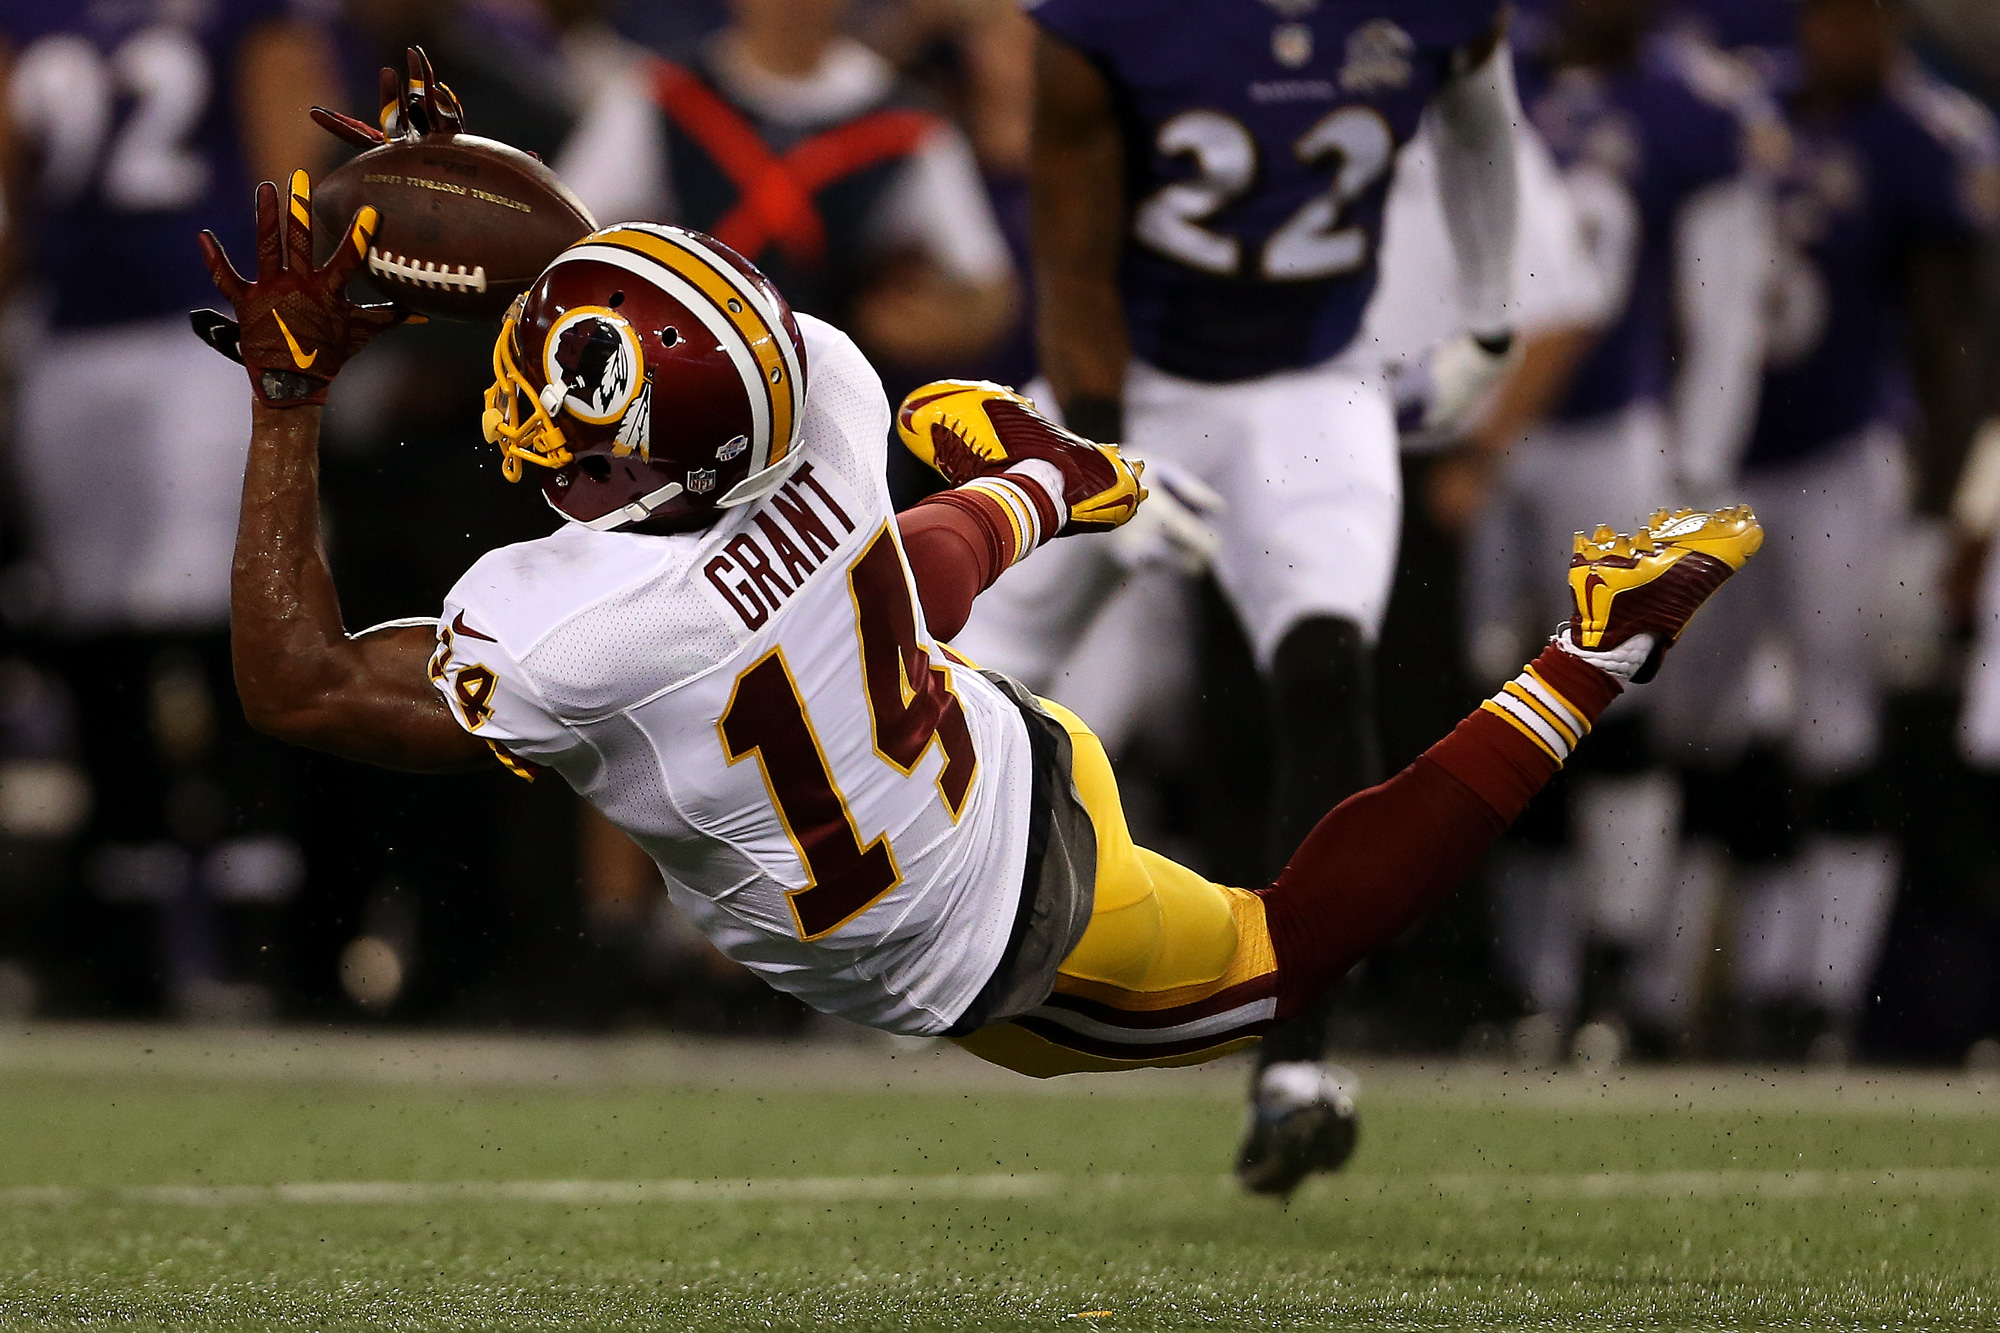  Wide receiver Ryan Grant #14 of the Washington Redskins misses a catch in the first quarter of a preseason game against the Baltimore Ravens at M&amp;T Bank Stadium on August 29, 2015 in Baltimore, Maryland. 